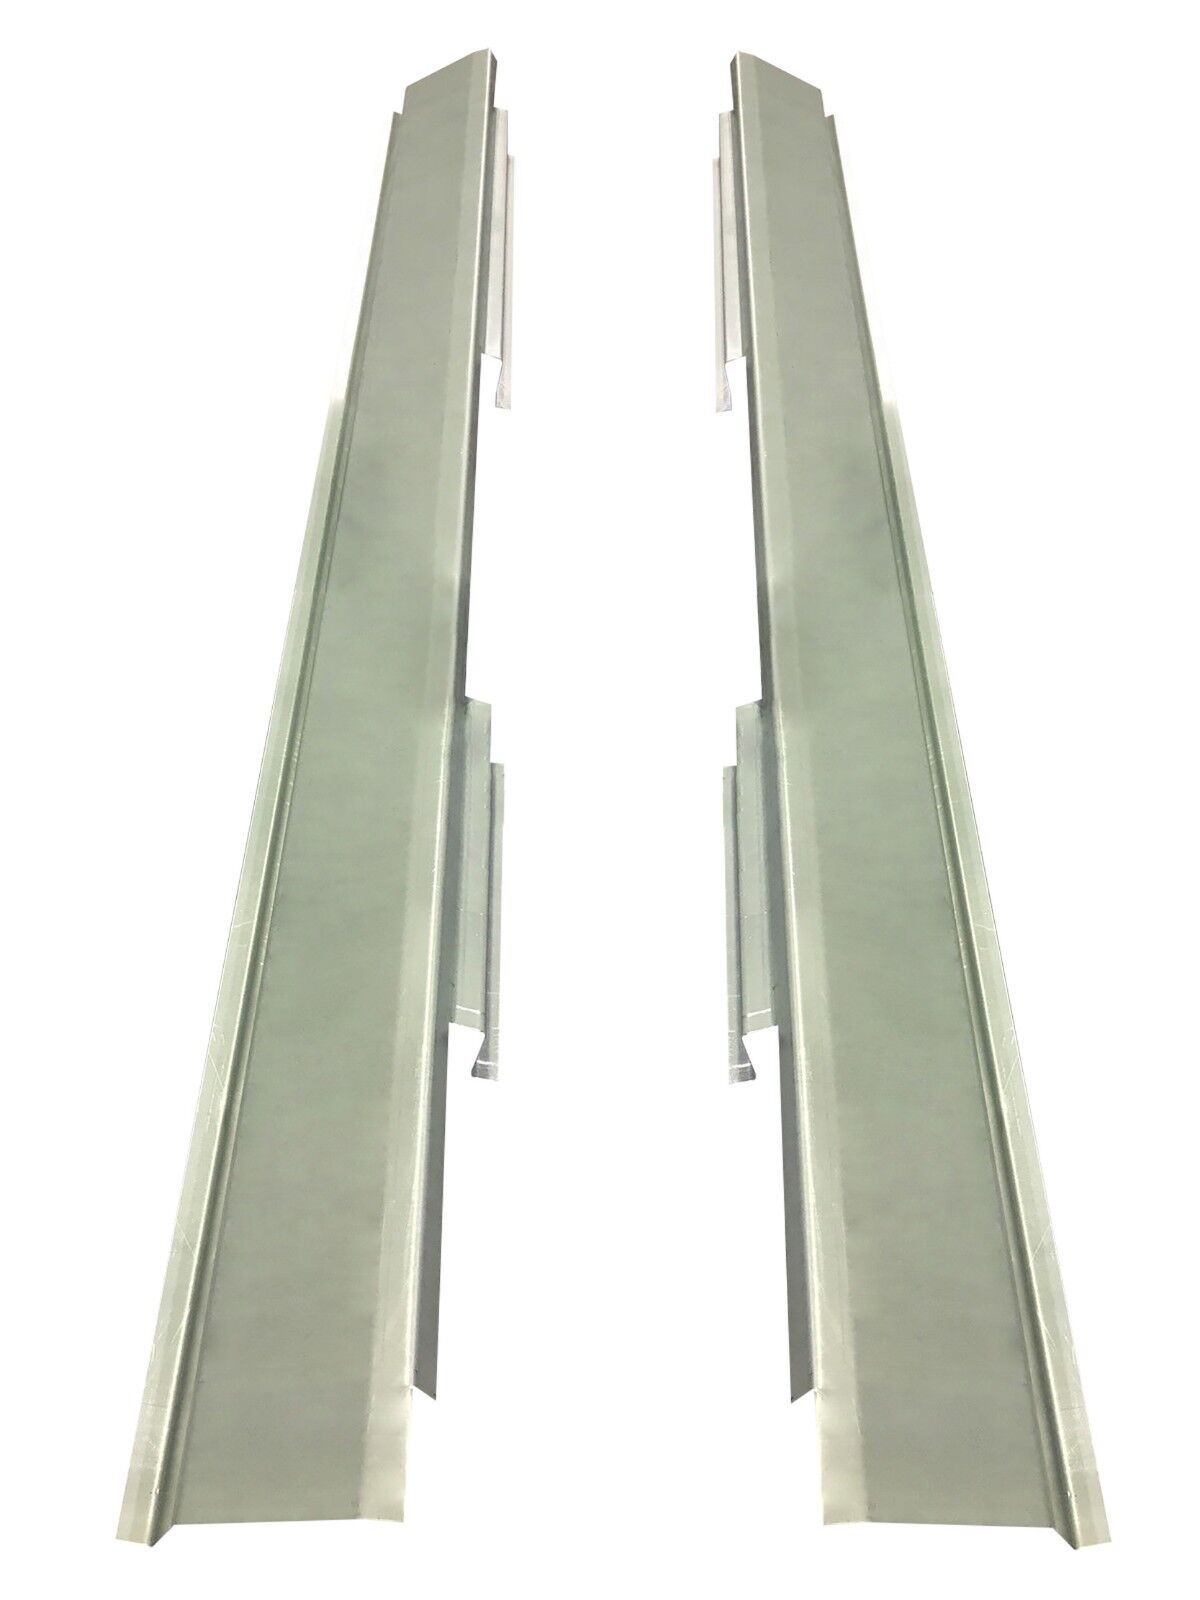 1981-89 DODGE ARIES RELIANT AND CHRYSLER LEBARON 4DR OUTER ROCKER PANELS PAIR